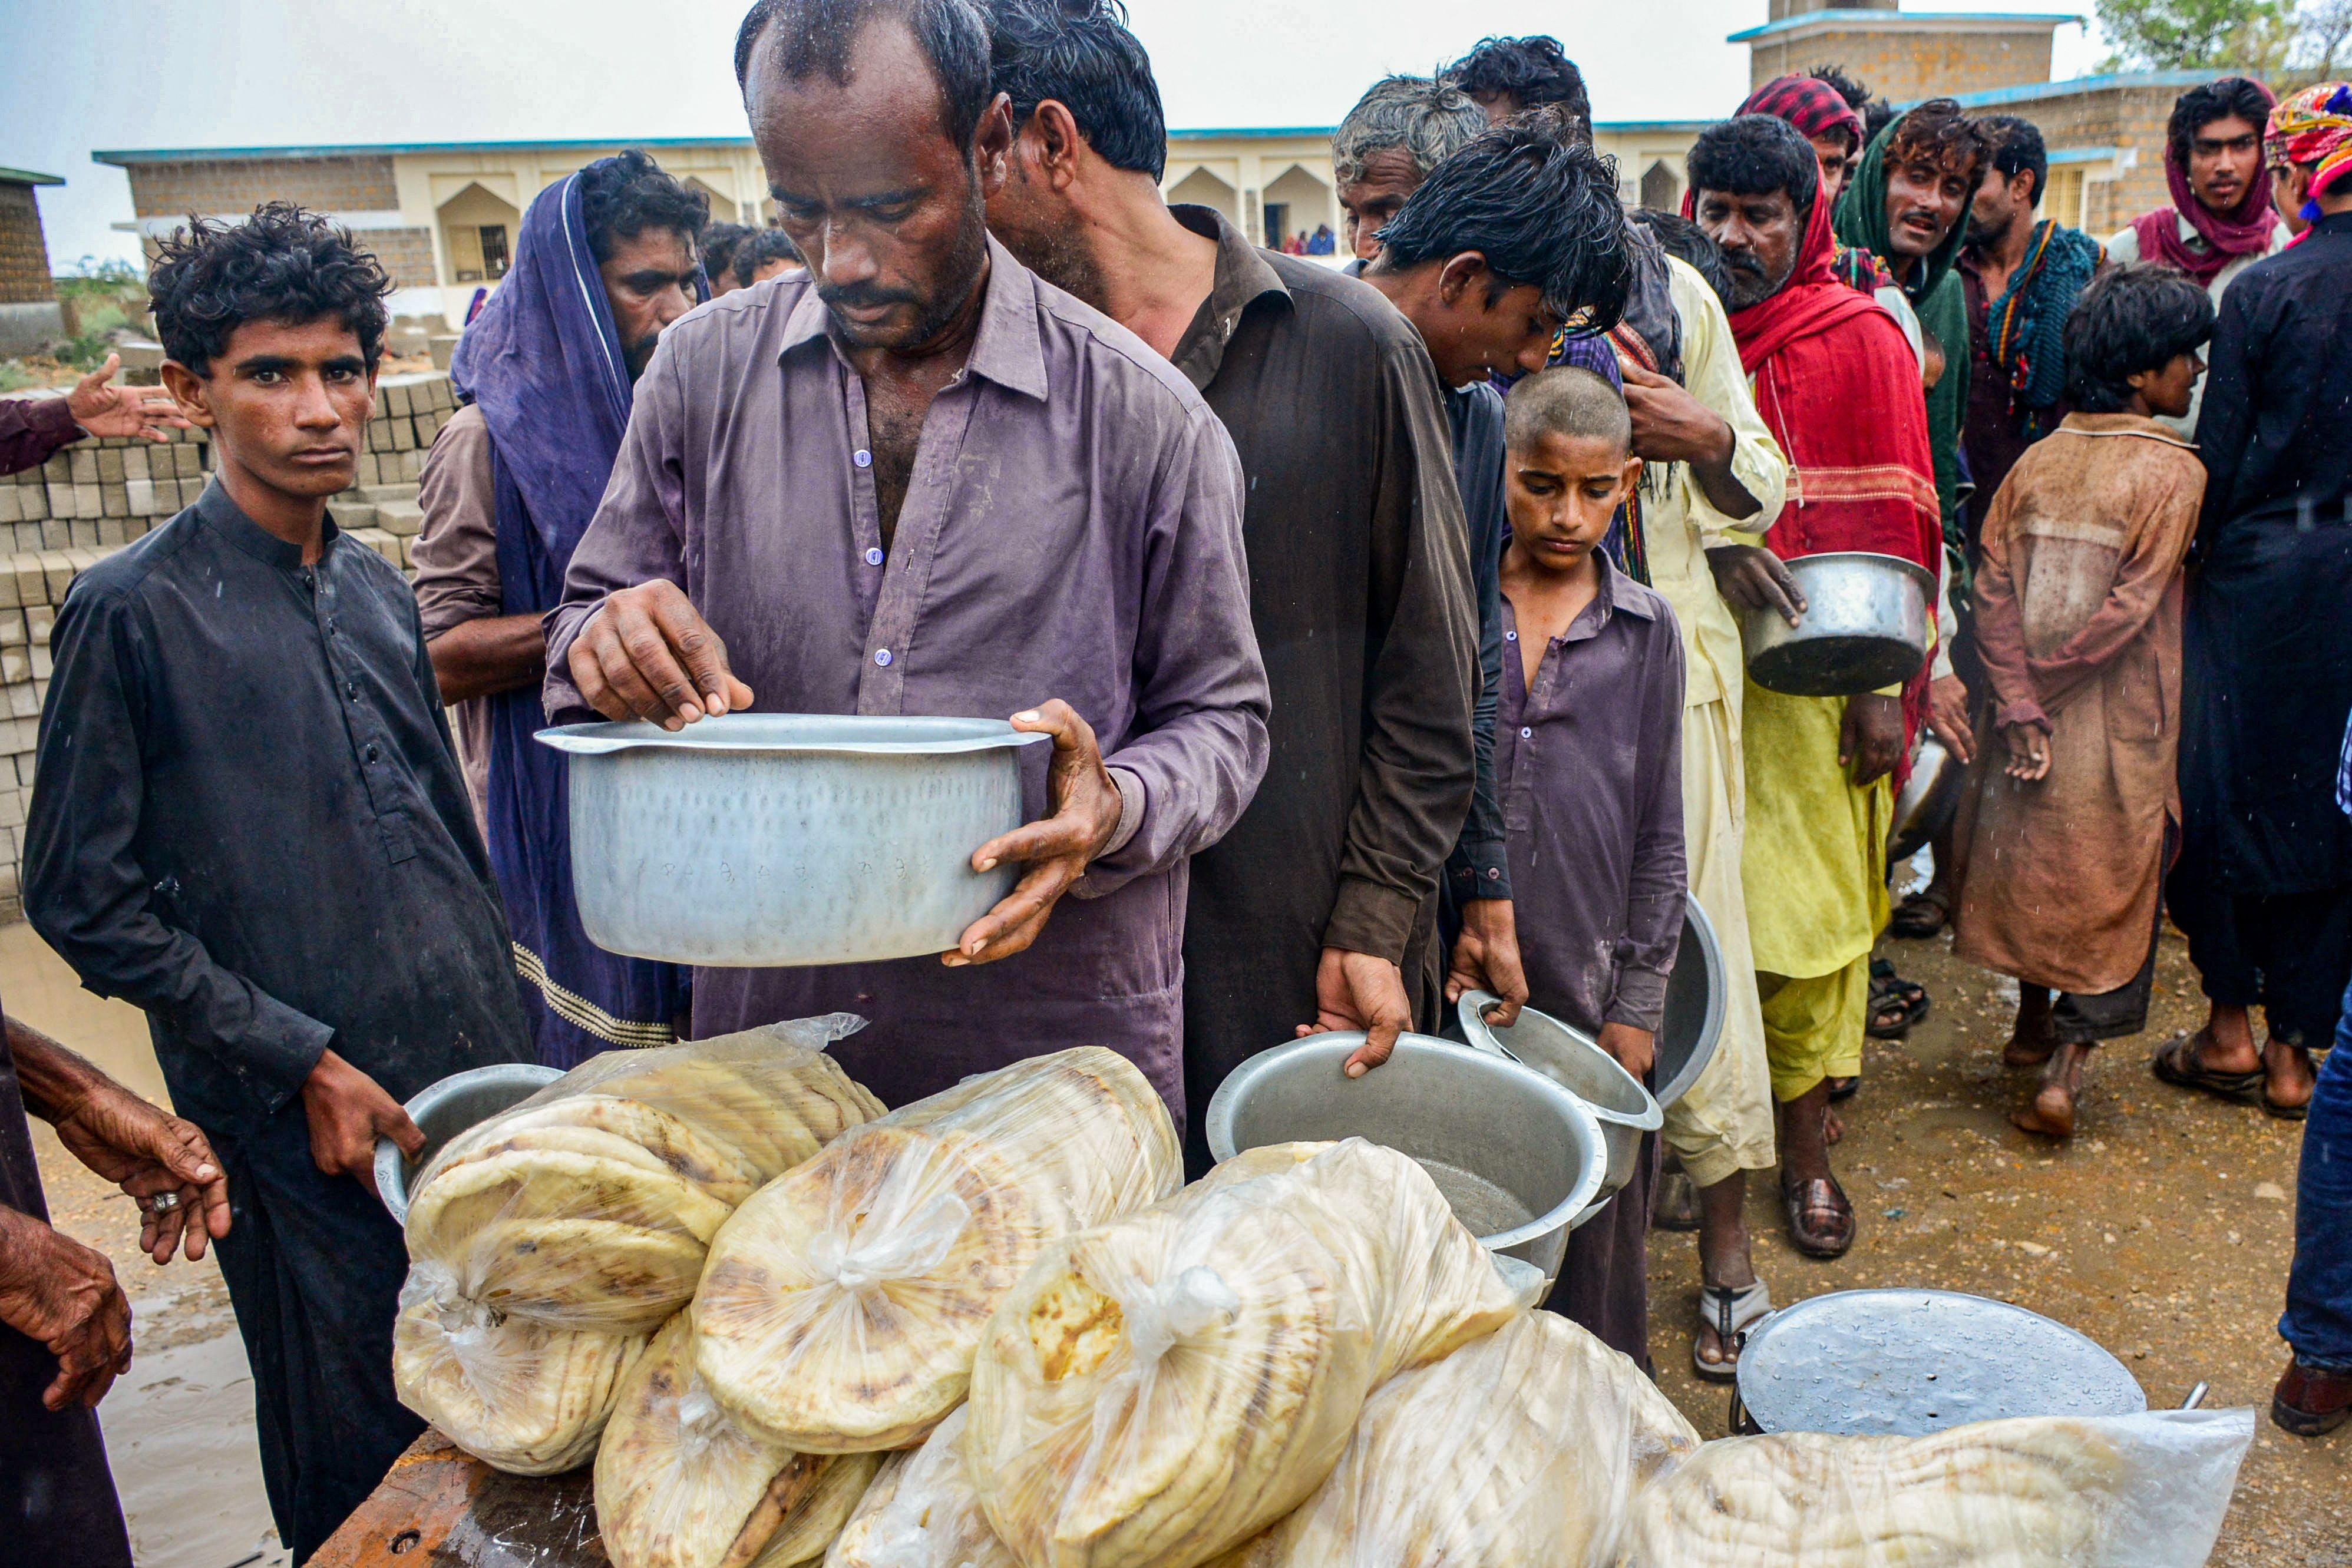 Cyclone evacuees receive food near a temporary shelter set at a school in Pakistan’s coastal area in Sujawal in Sindh province